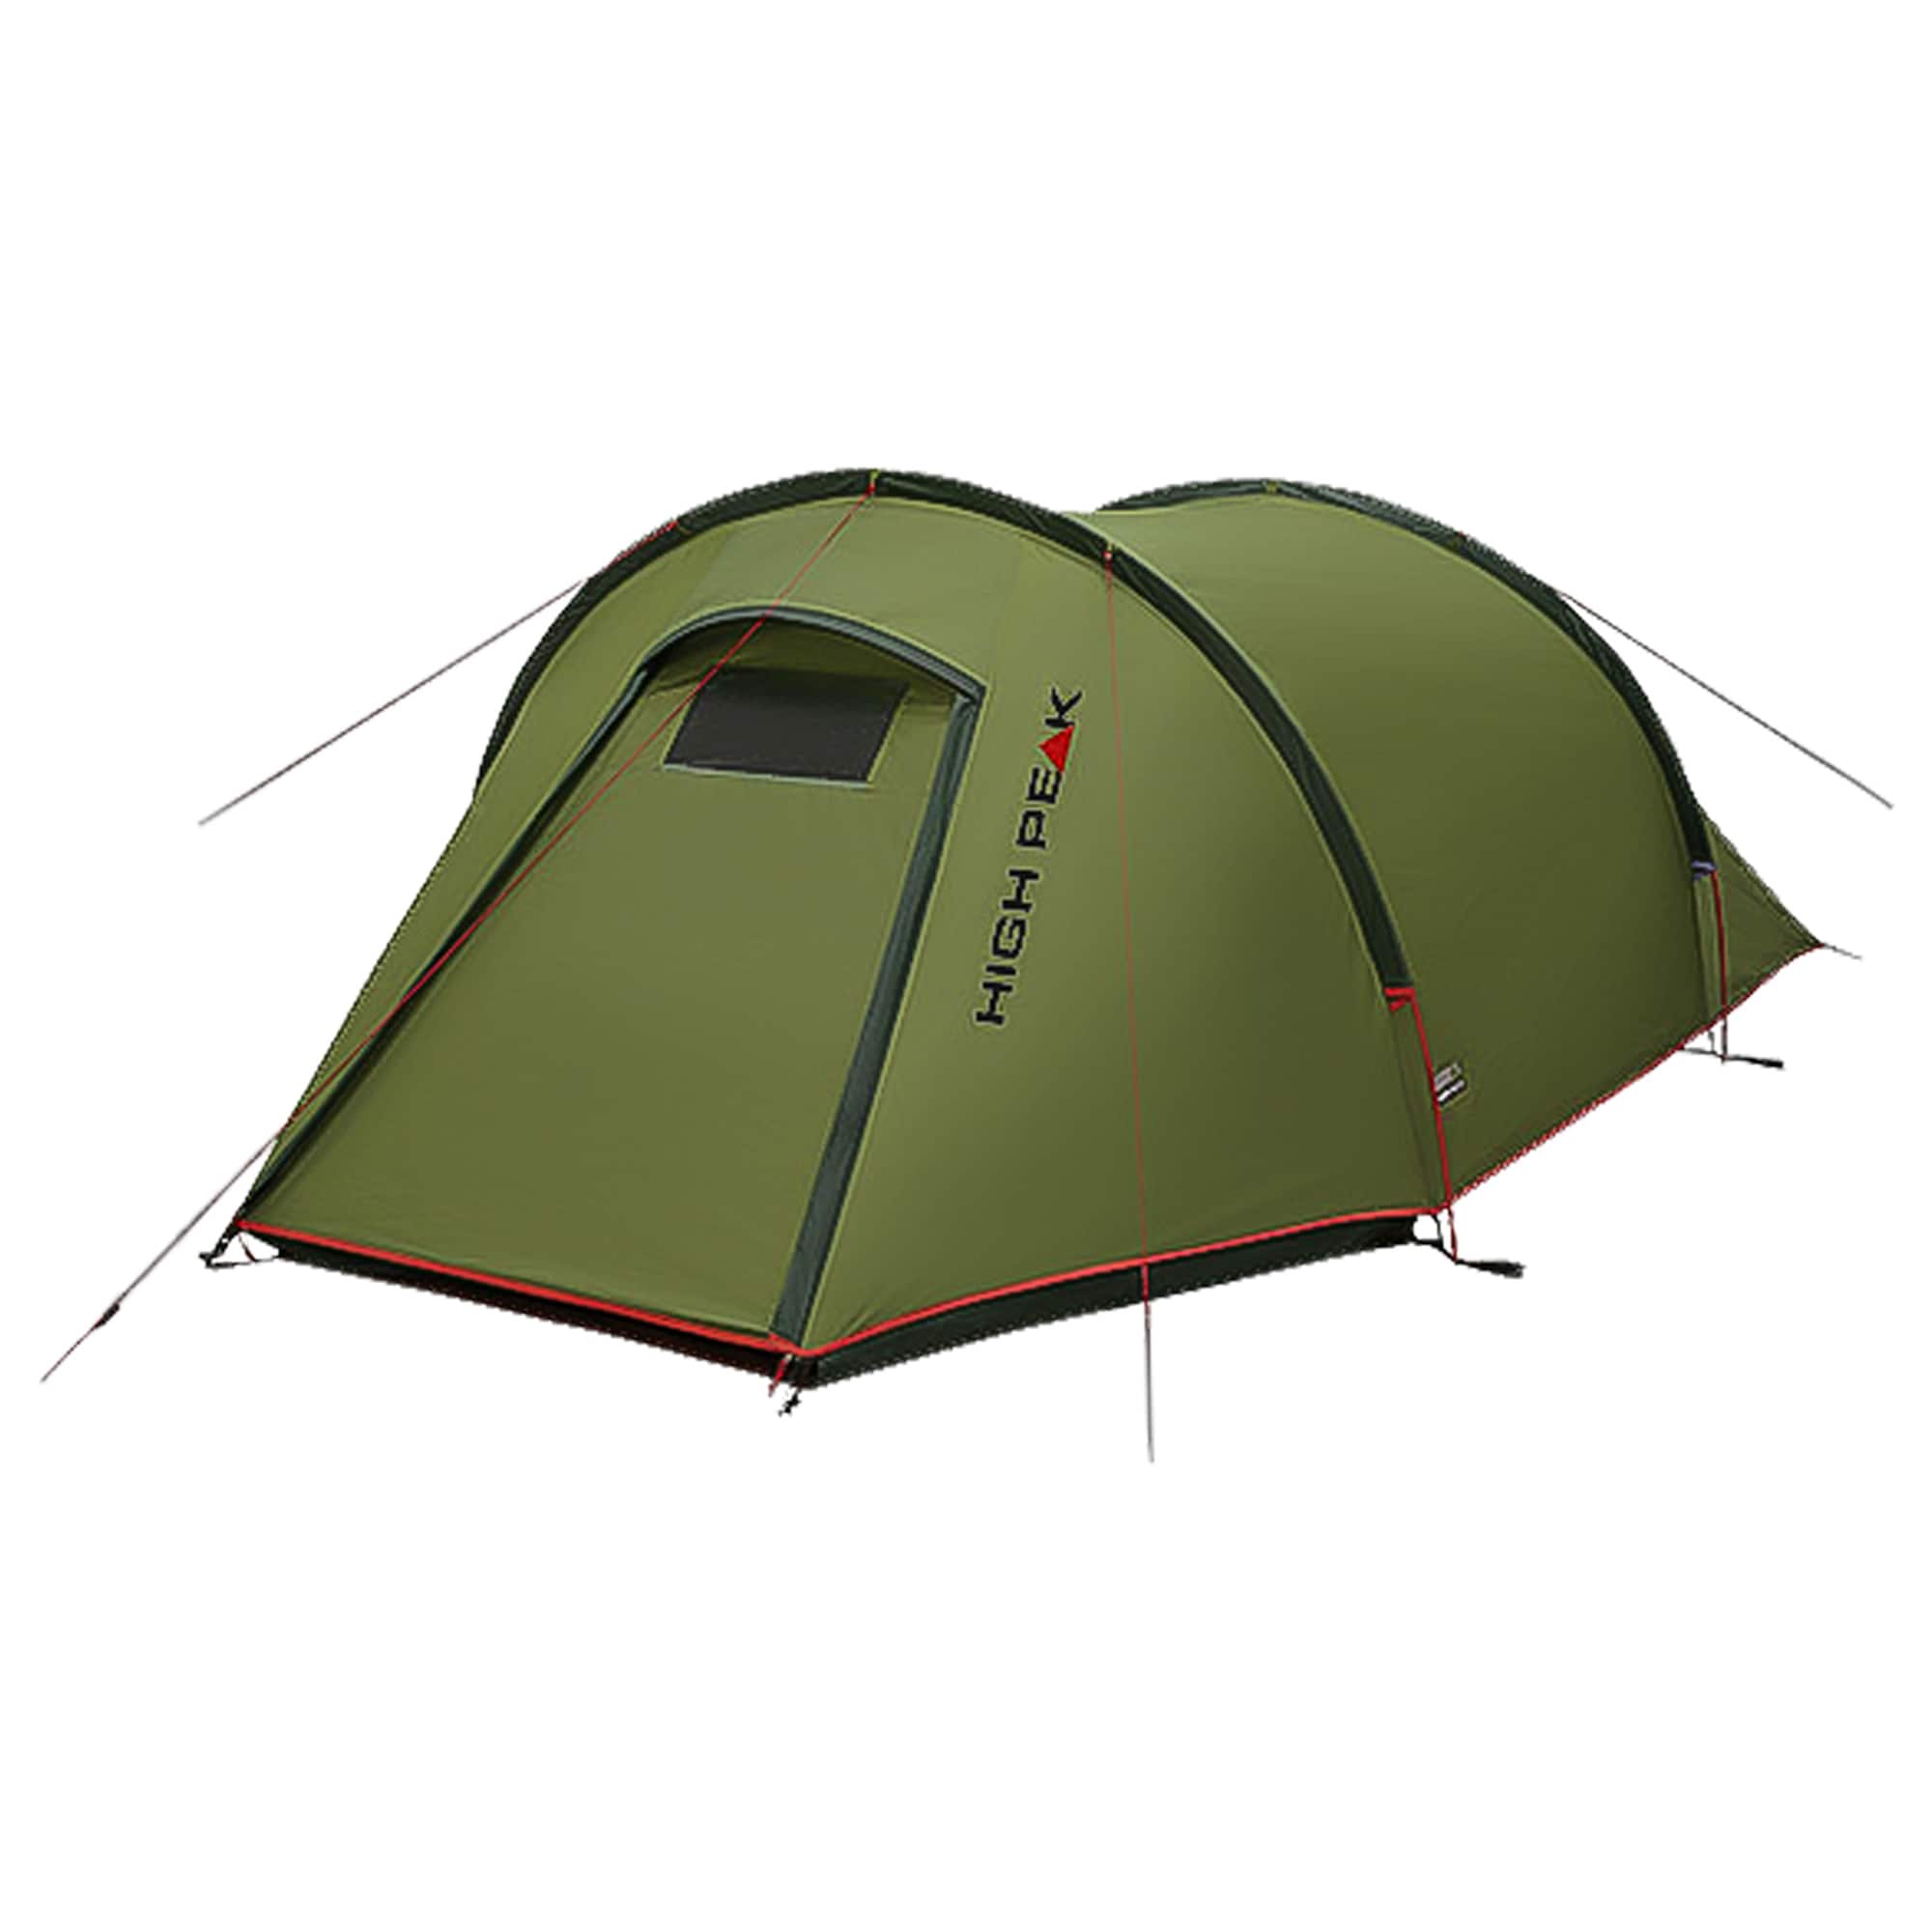 onkruid regering hand Purchase the High Peak Tent Kite 2 pesto/red by ASMC